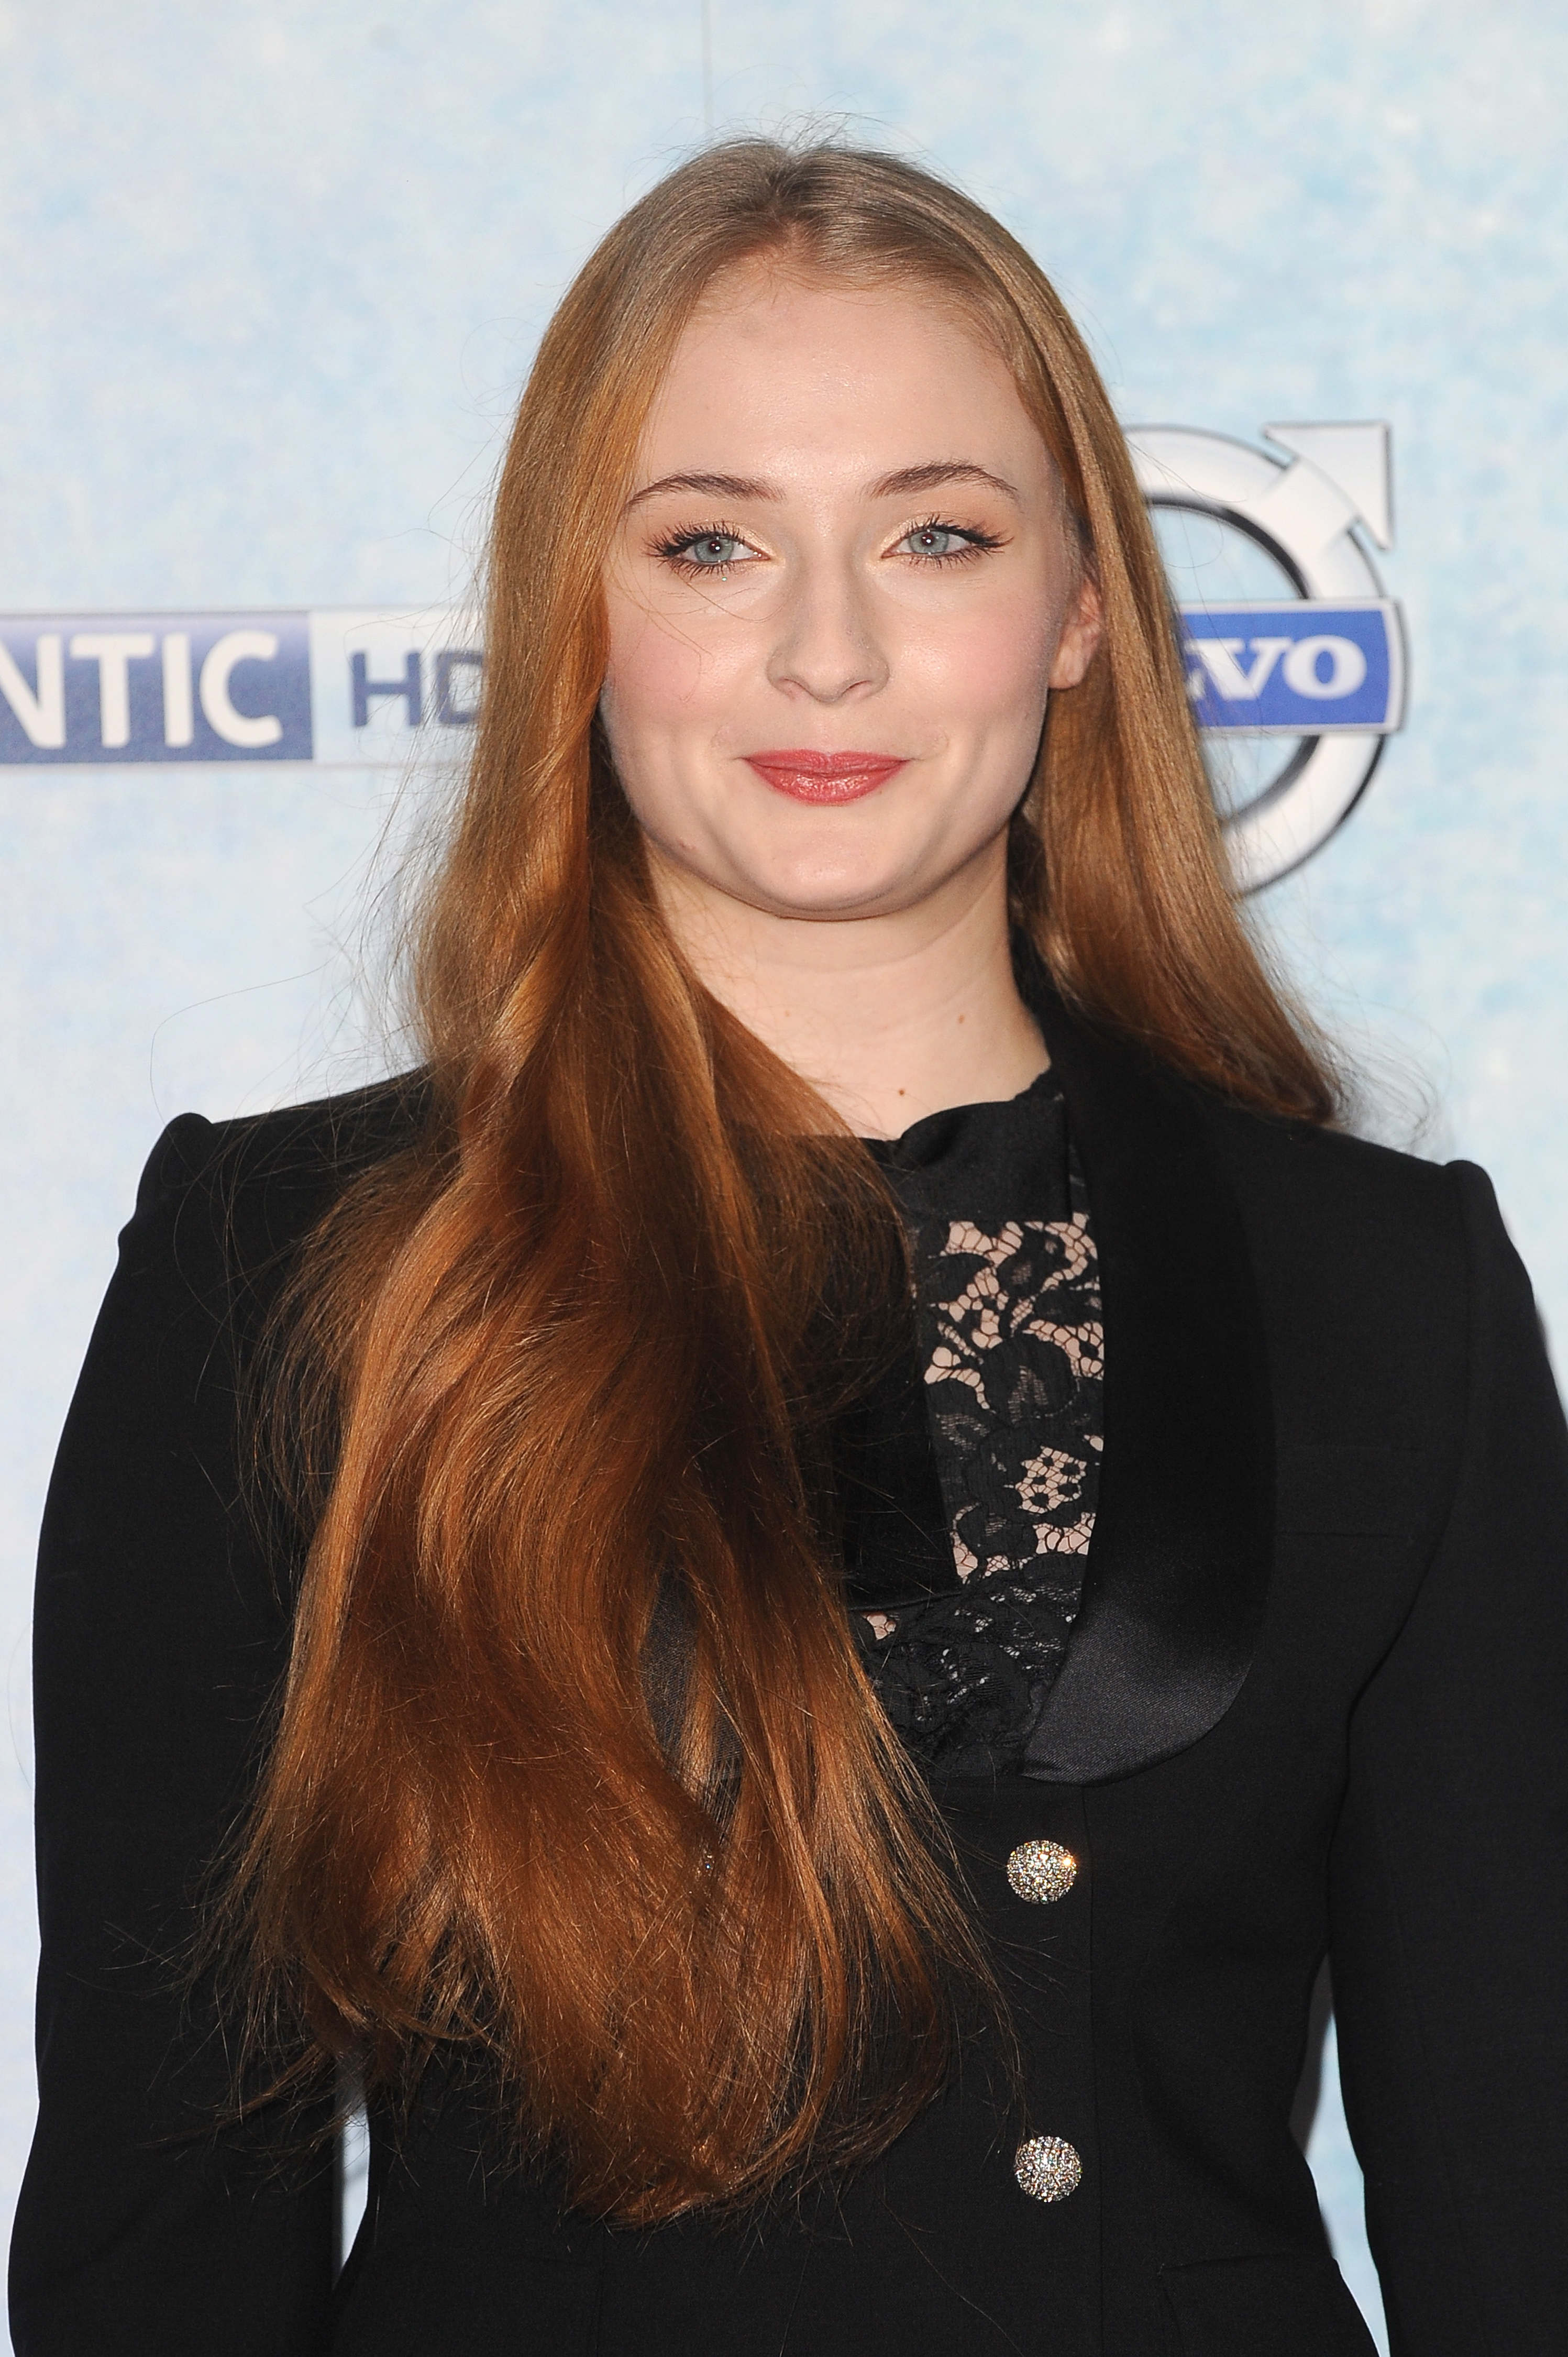 Sophie Turner (actress) photo 83 of 945 pics, wallpaper - photo #687700 - ThePlace2